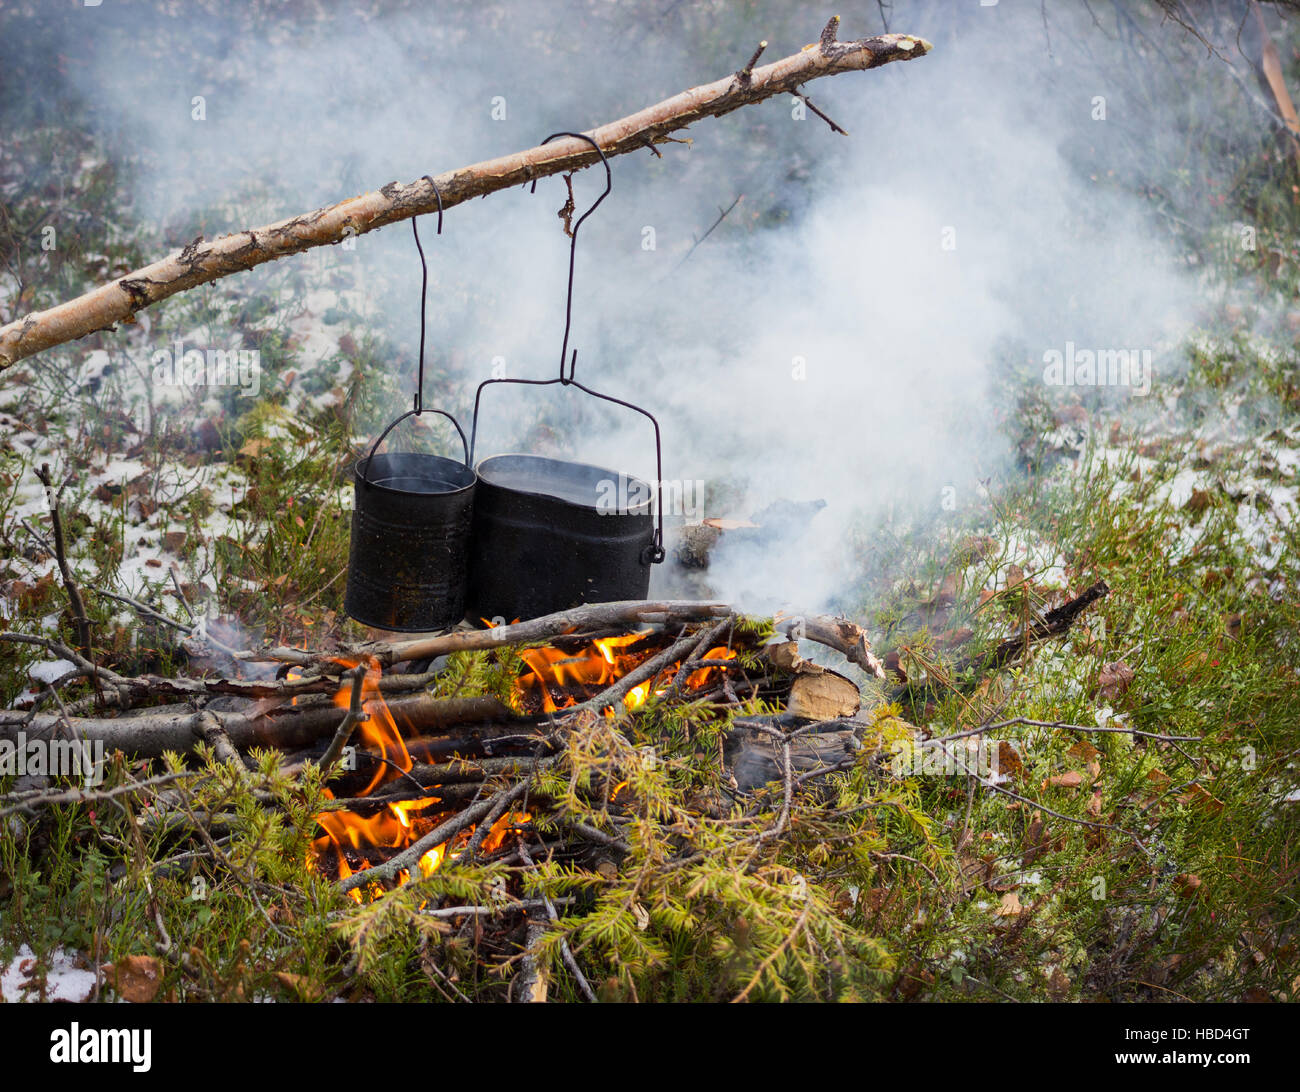 Cooking on a fire in field conditions Stock Photo